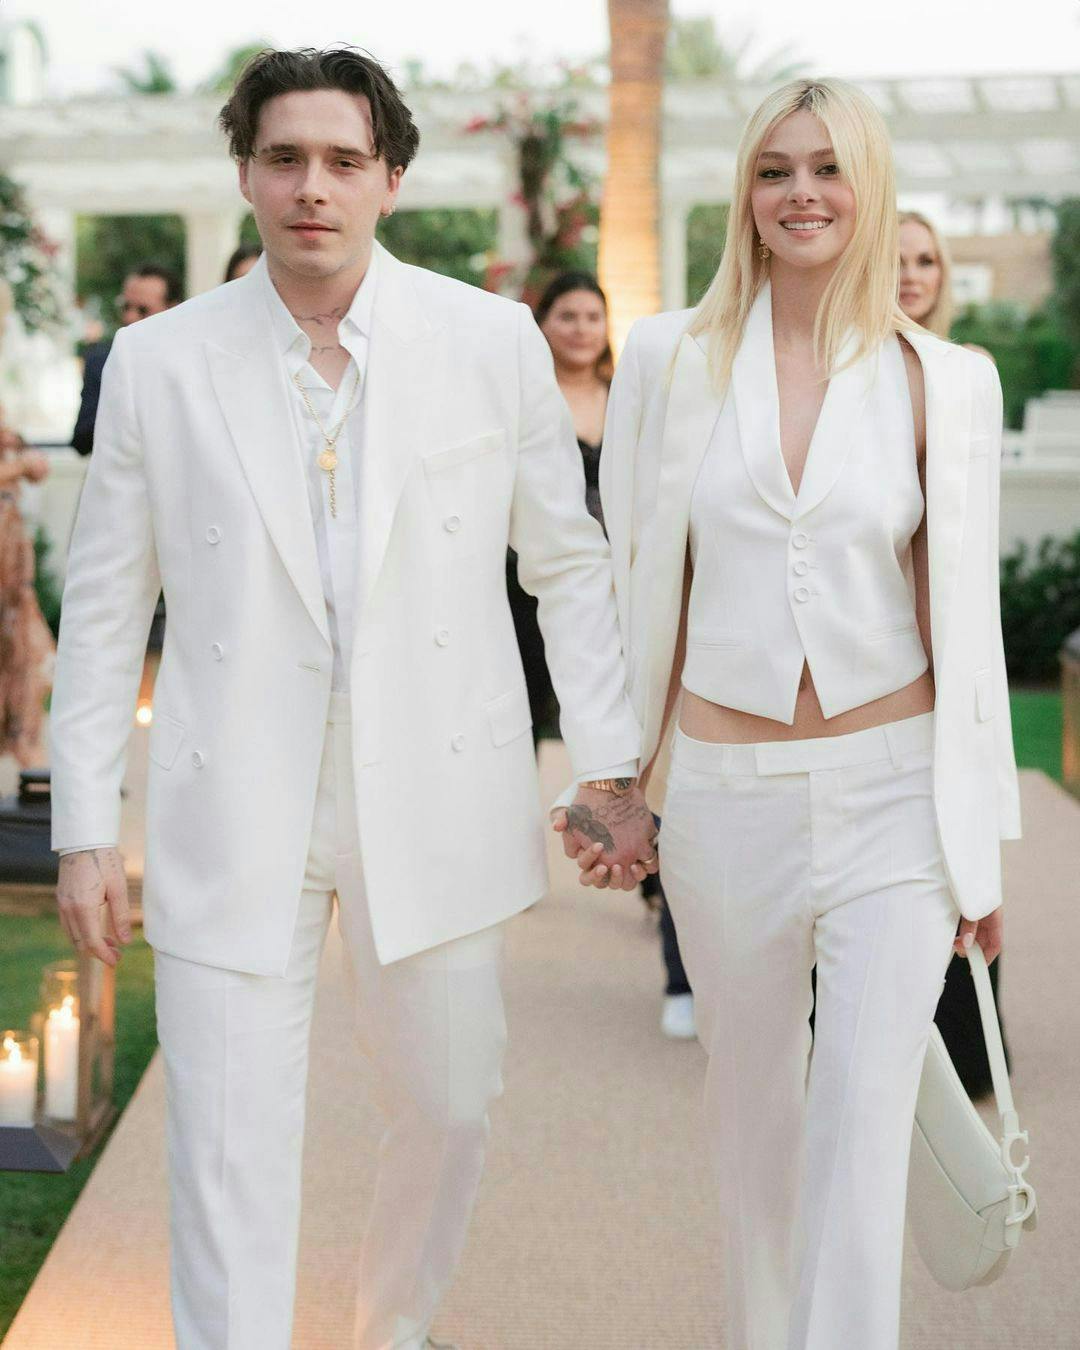 A man in a white suit next to a woman in a white vest and pants.